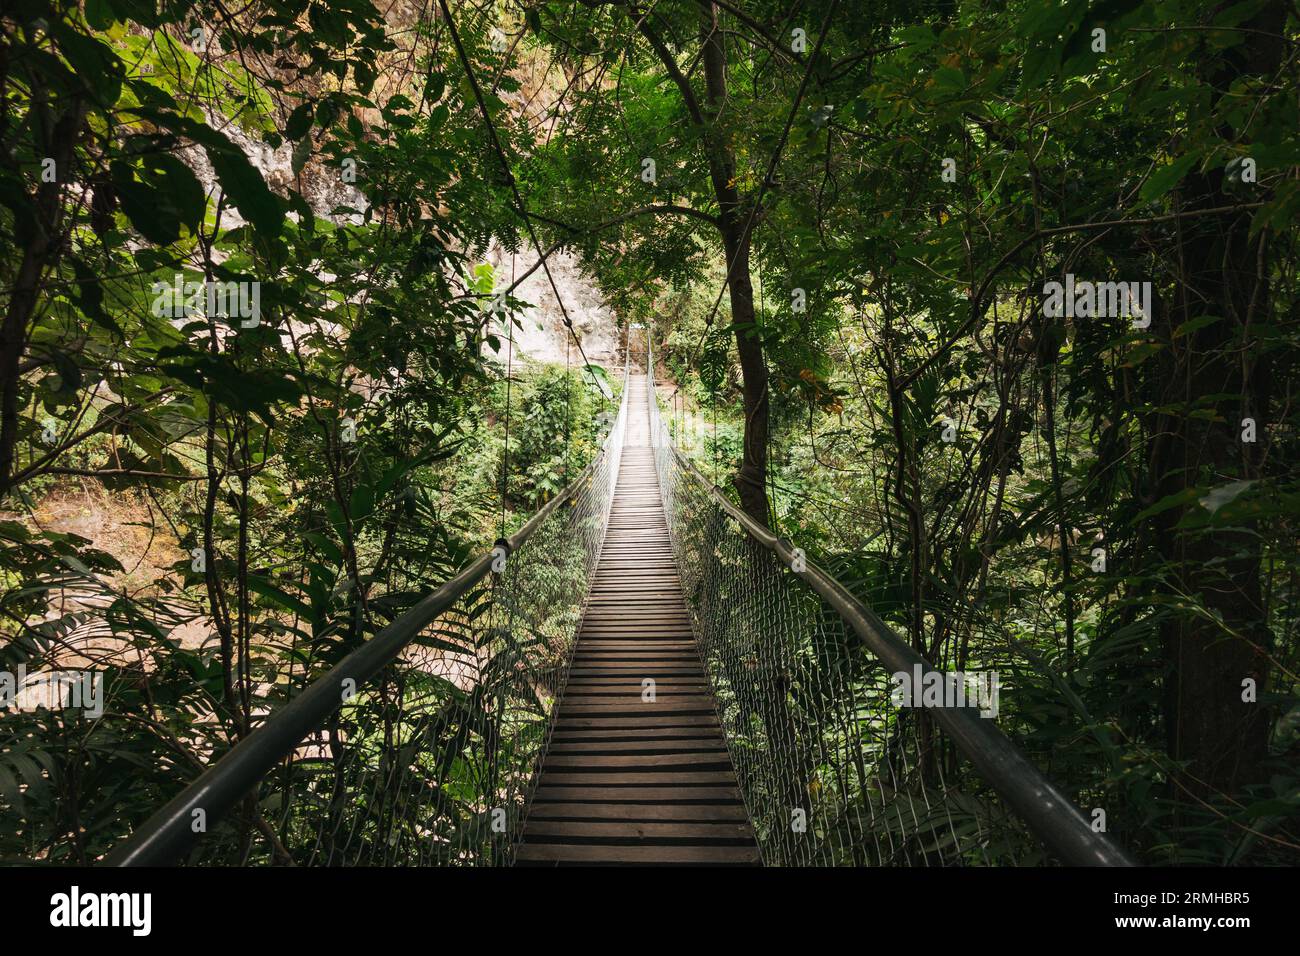 a cable bridge with wood planks in Atitlán Natural Reserve, a nature preserve on the shores of Lake Atitlan, Guatemala Stock Photo